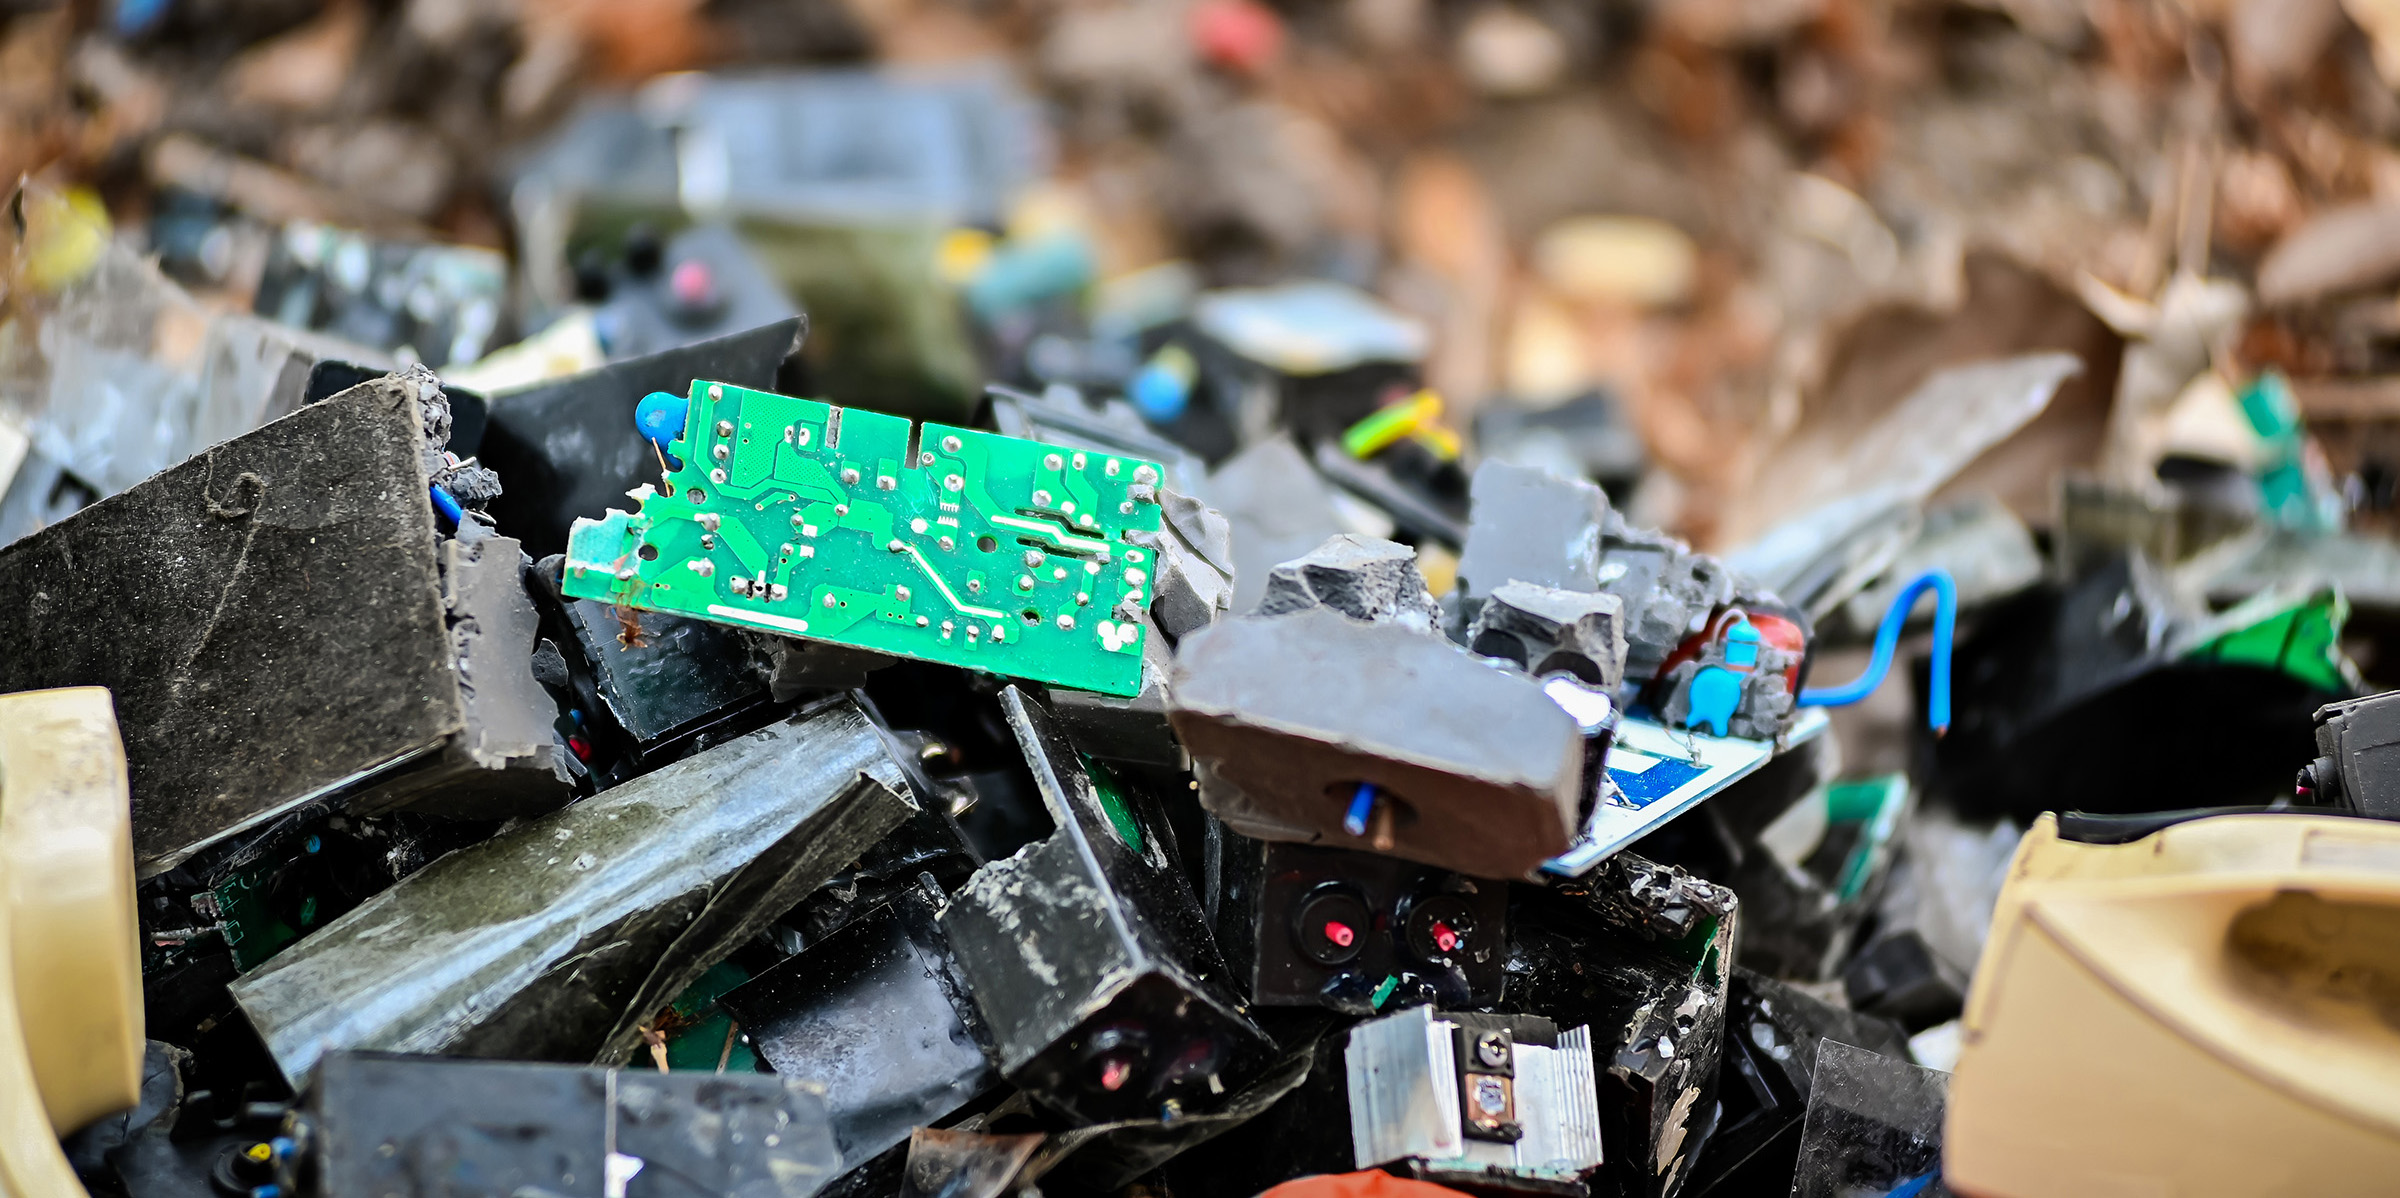 Pile of electronic waste